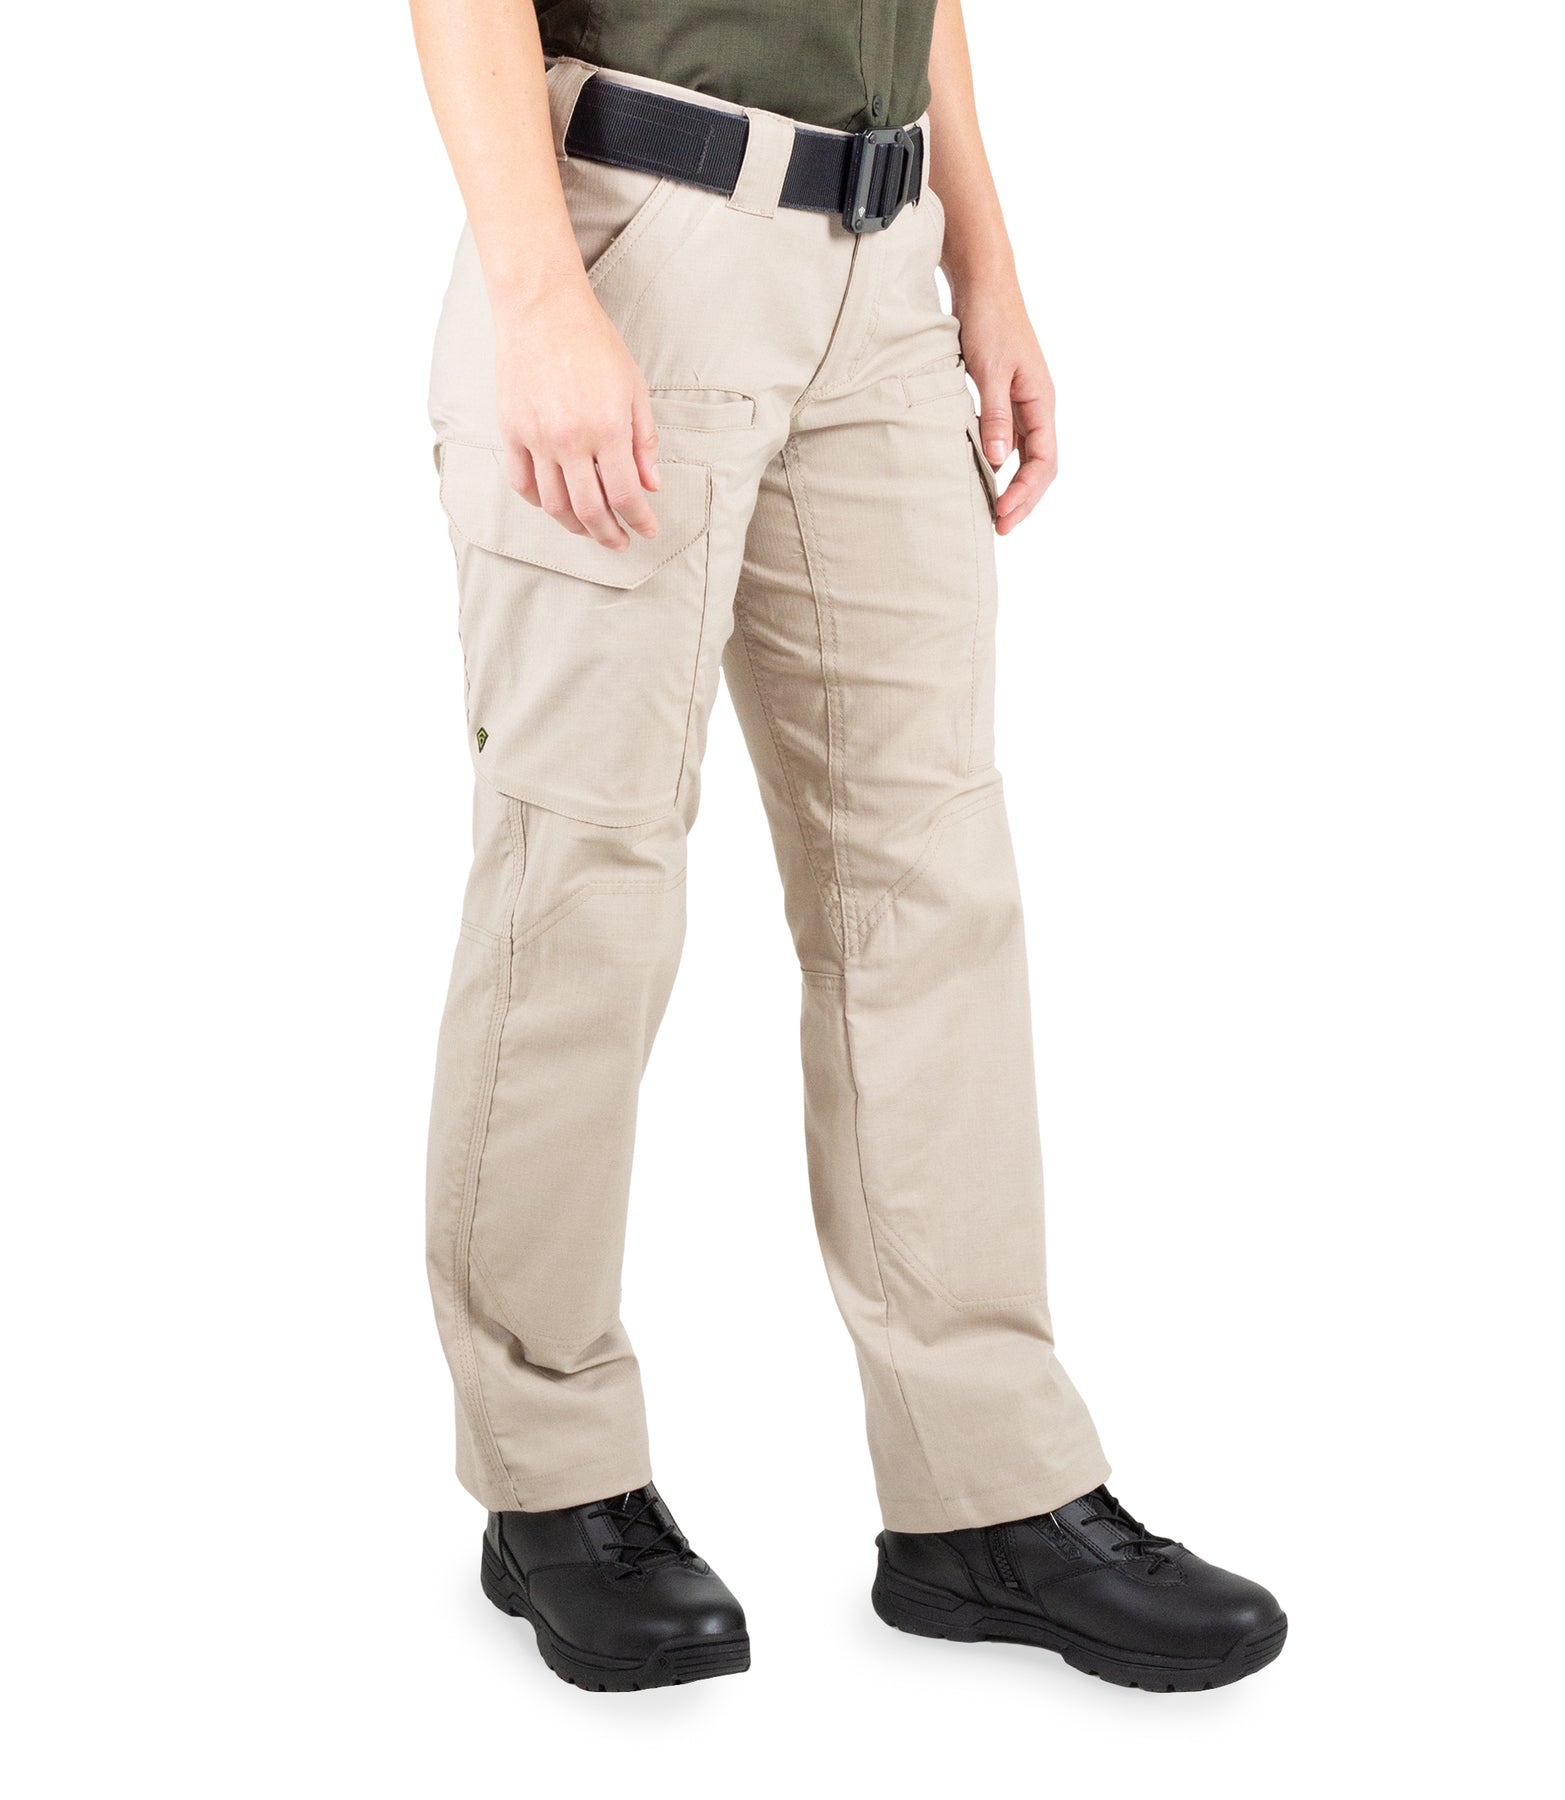 Women tactical pants: Designed for Action and Comfort in Any Situation”插图4